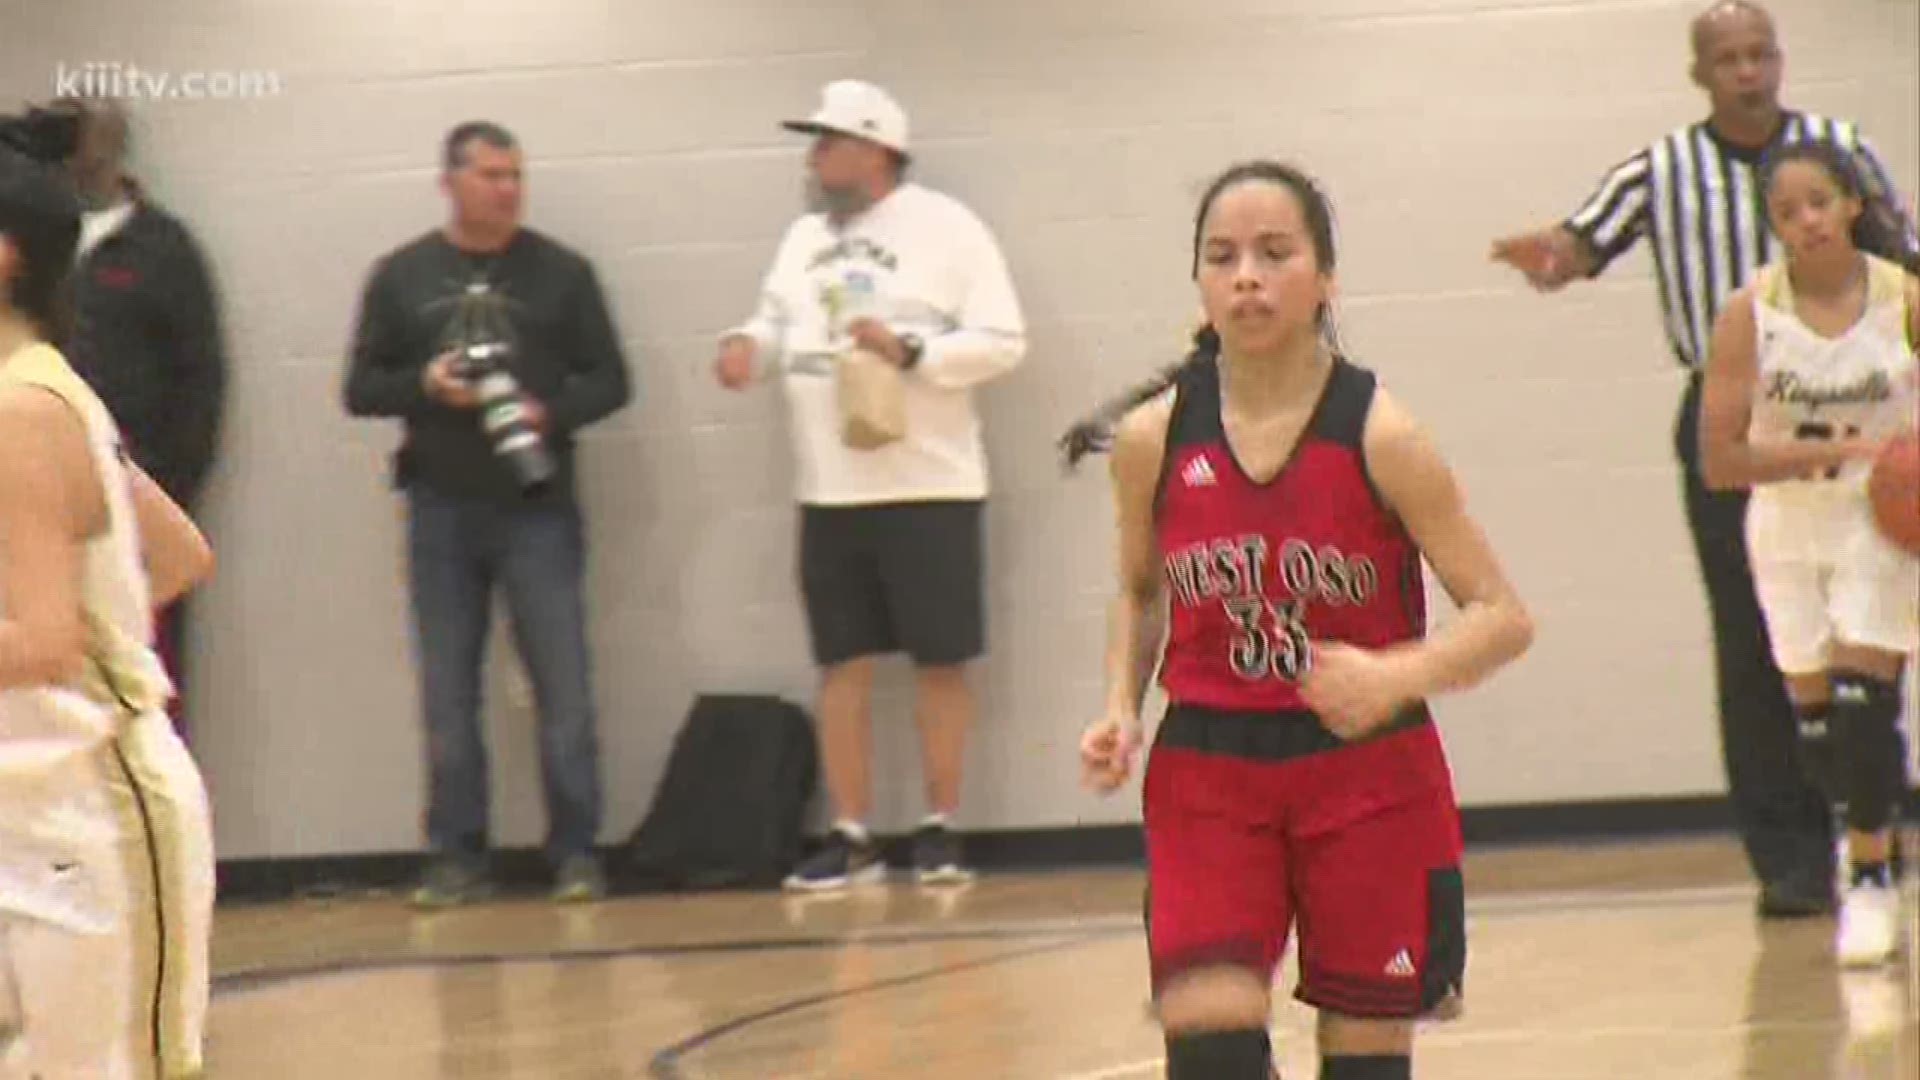 West Oso's Alyssa Grant and Larissa Lopez are our 3News Athlete's of the Week.